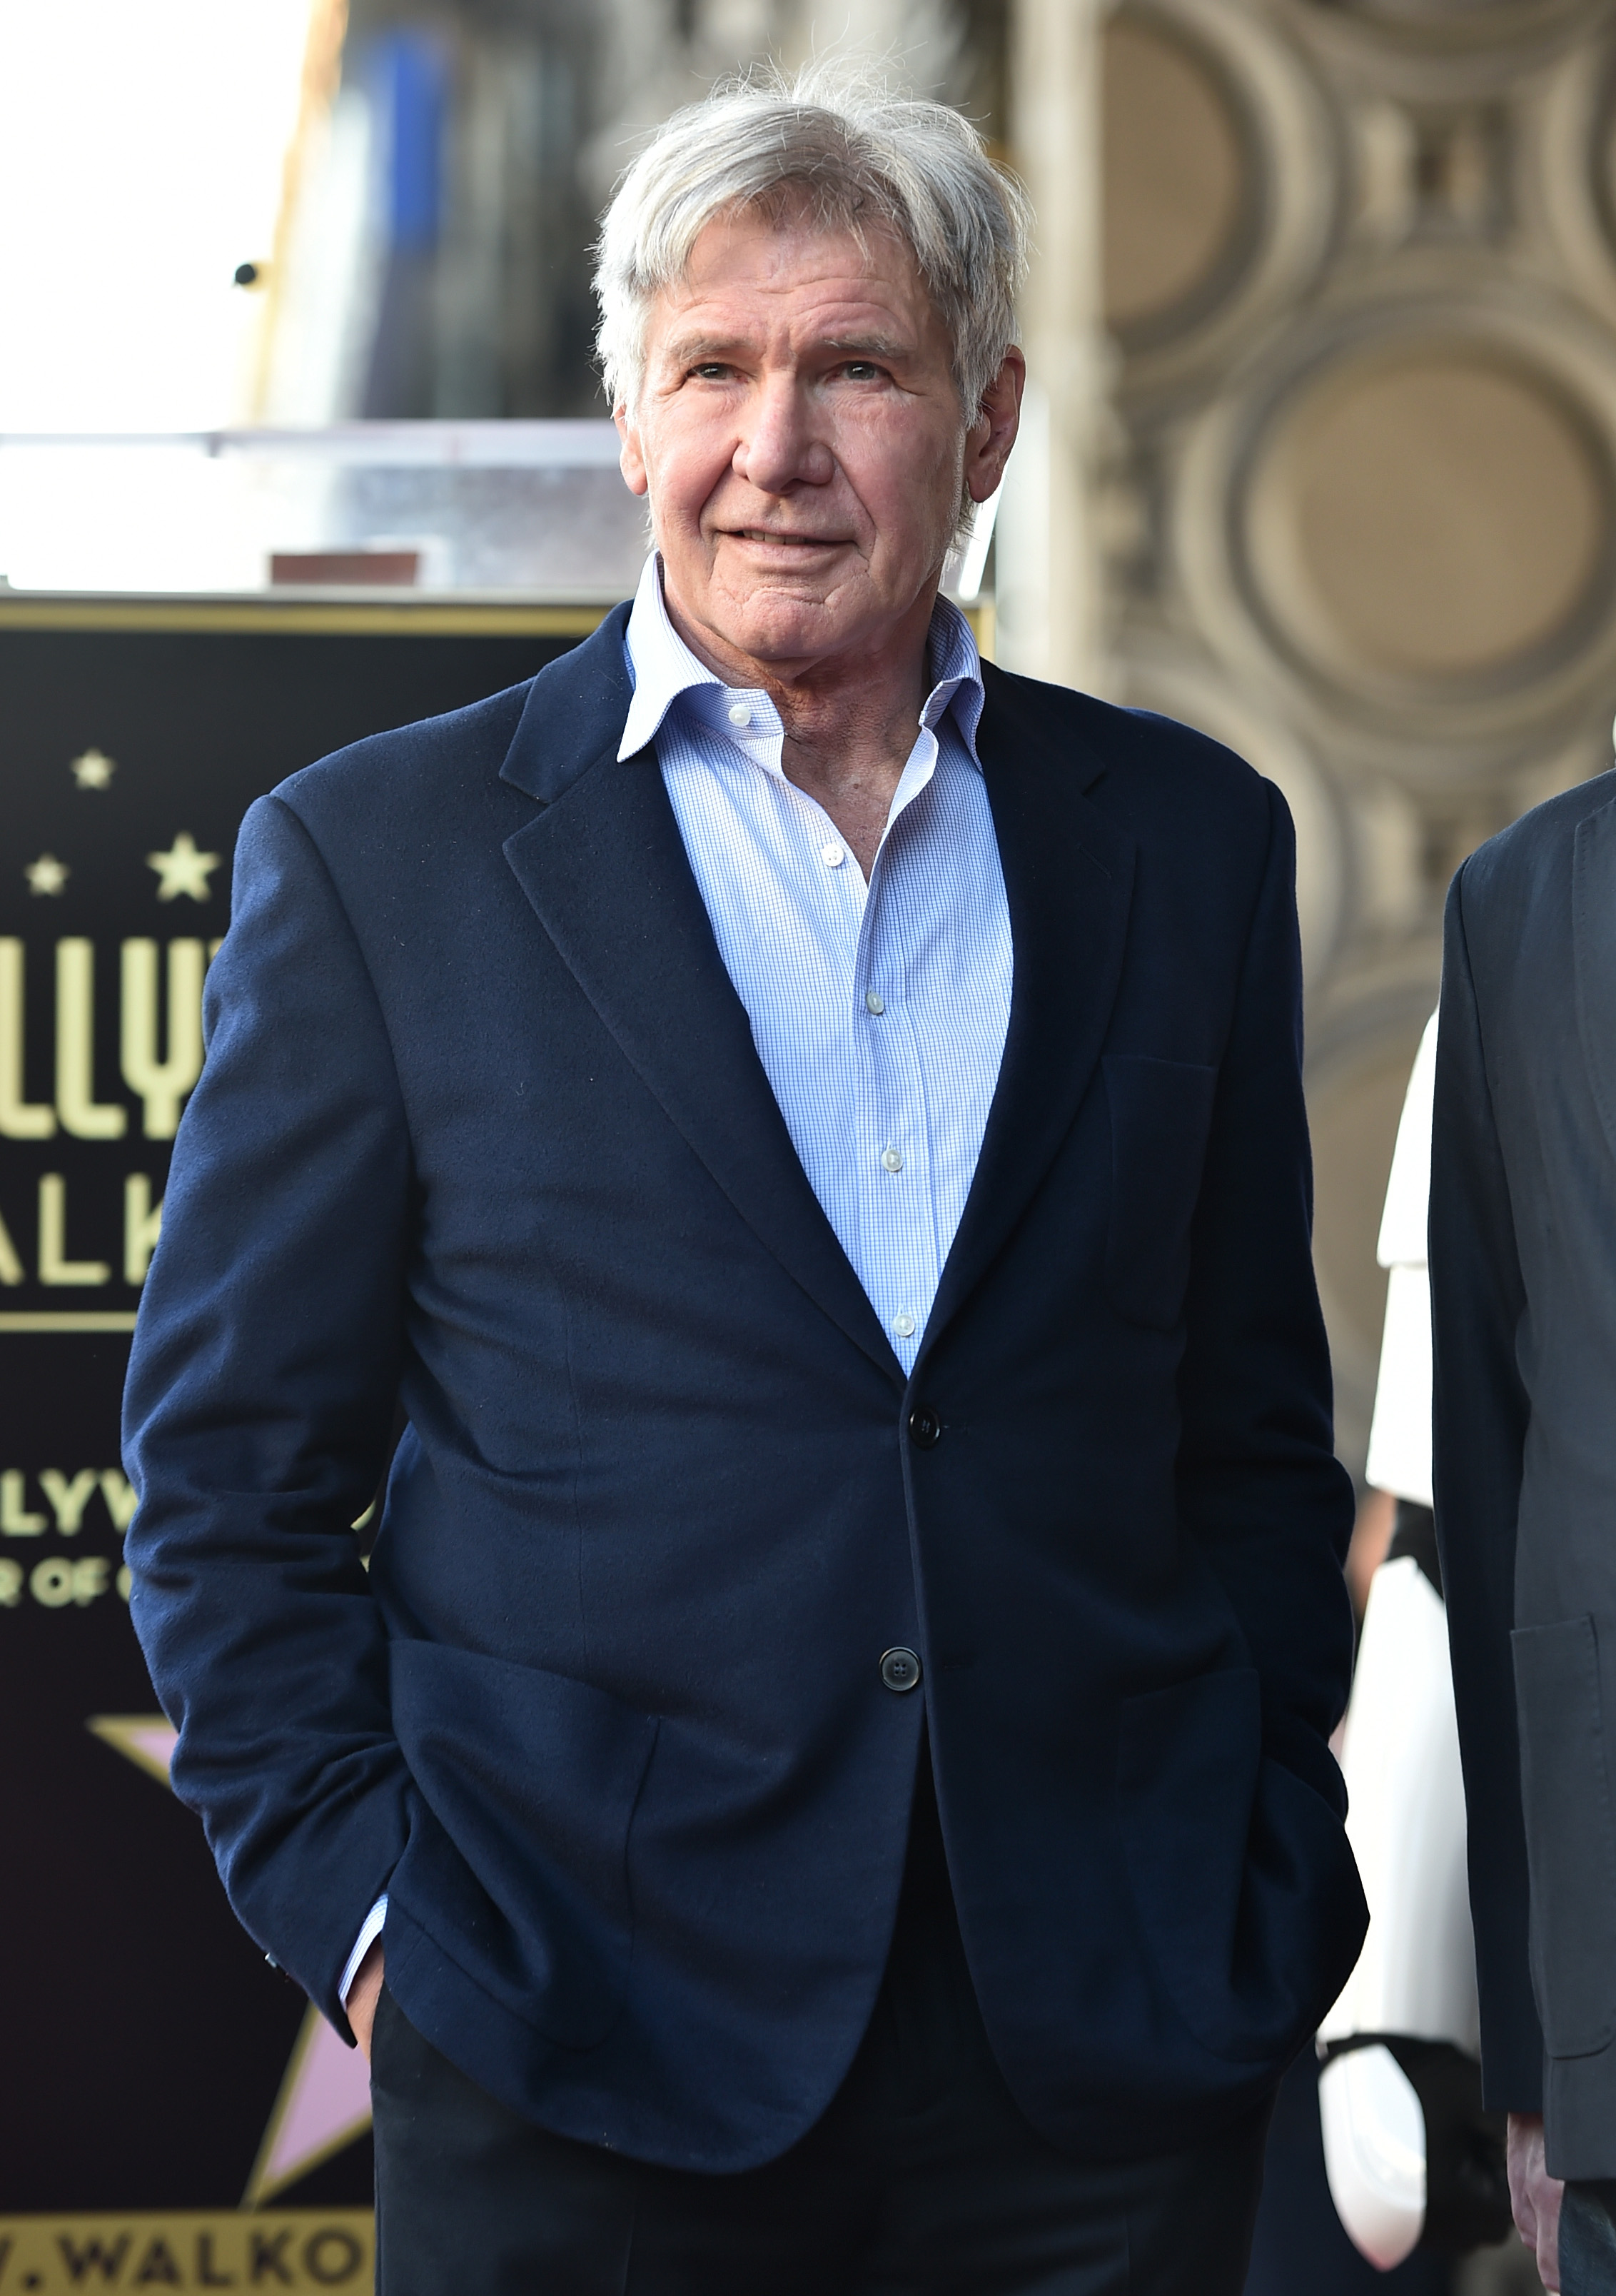 Harrison Ford at Mark Hamill's star ceremony on the Hollywood Walk of Fame in Hollywood, California on March 8, 2018 | Source: Getty Images